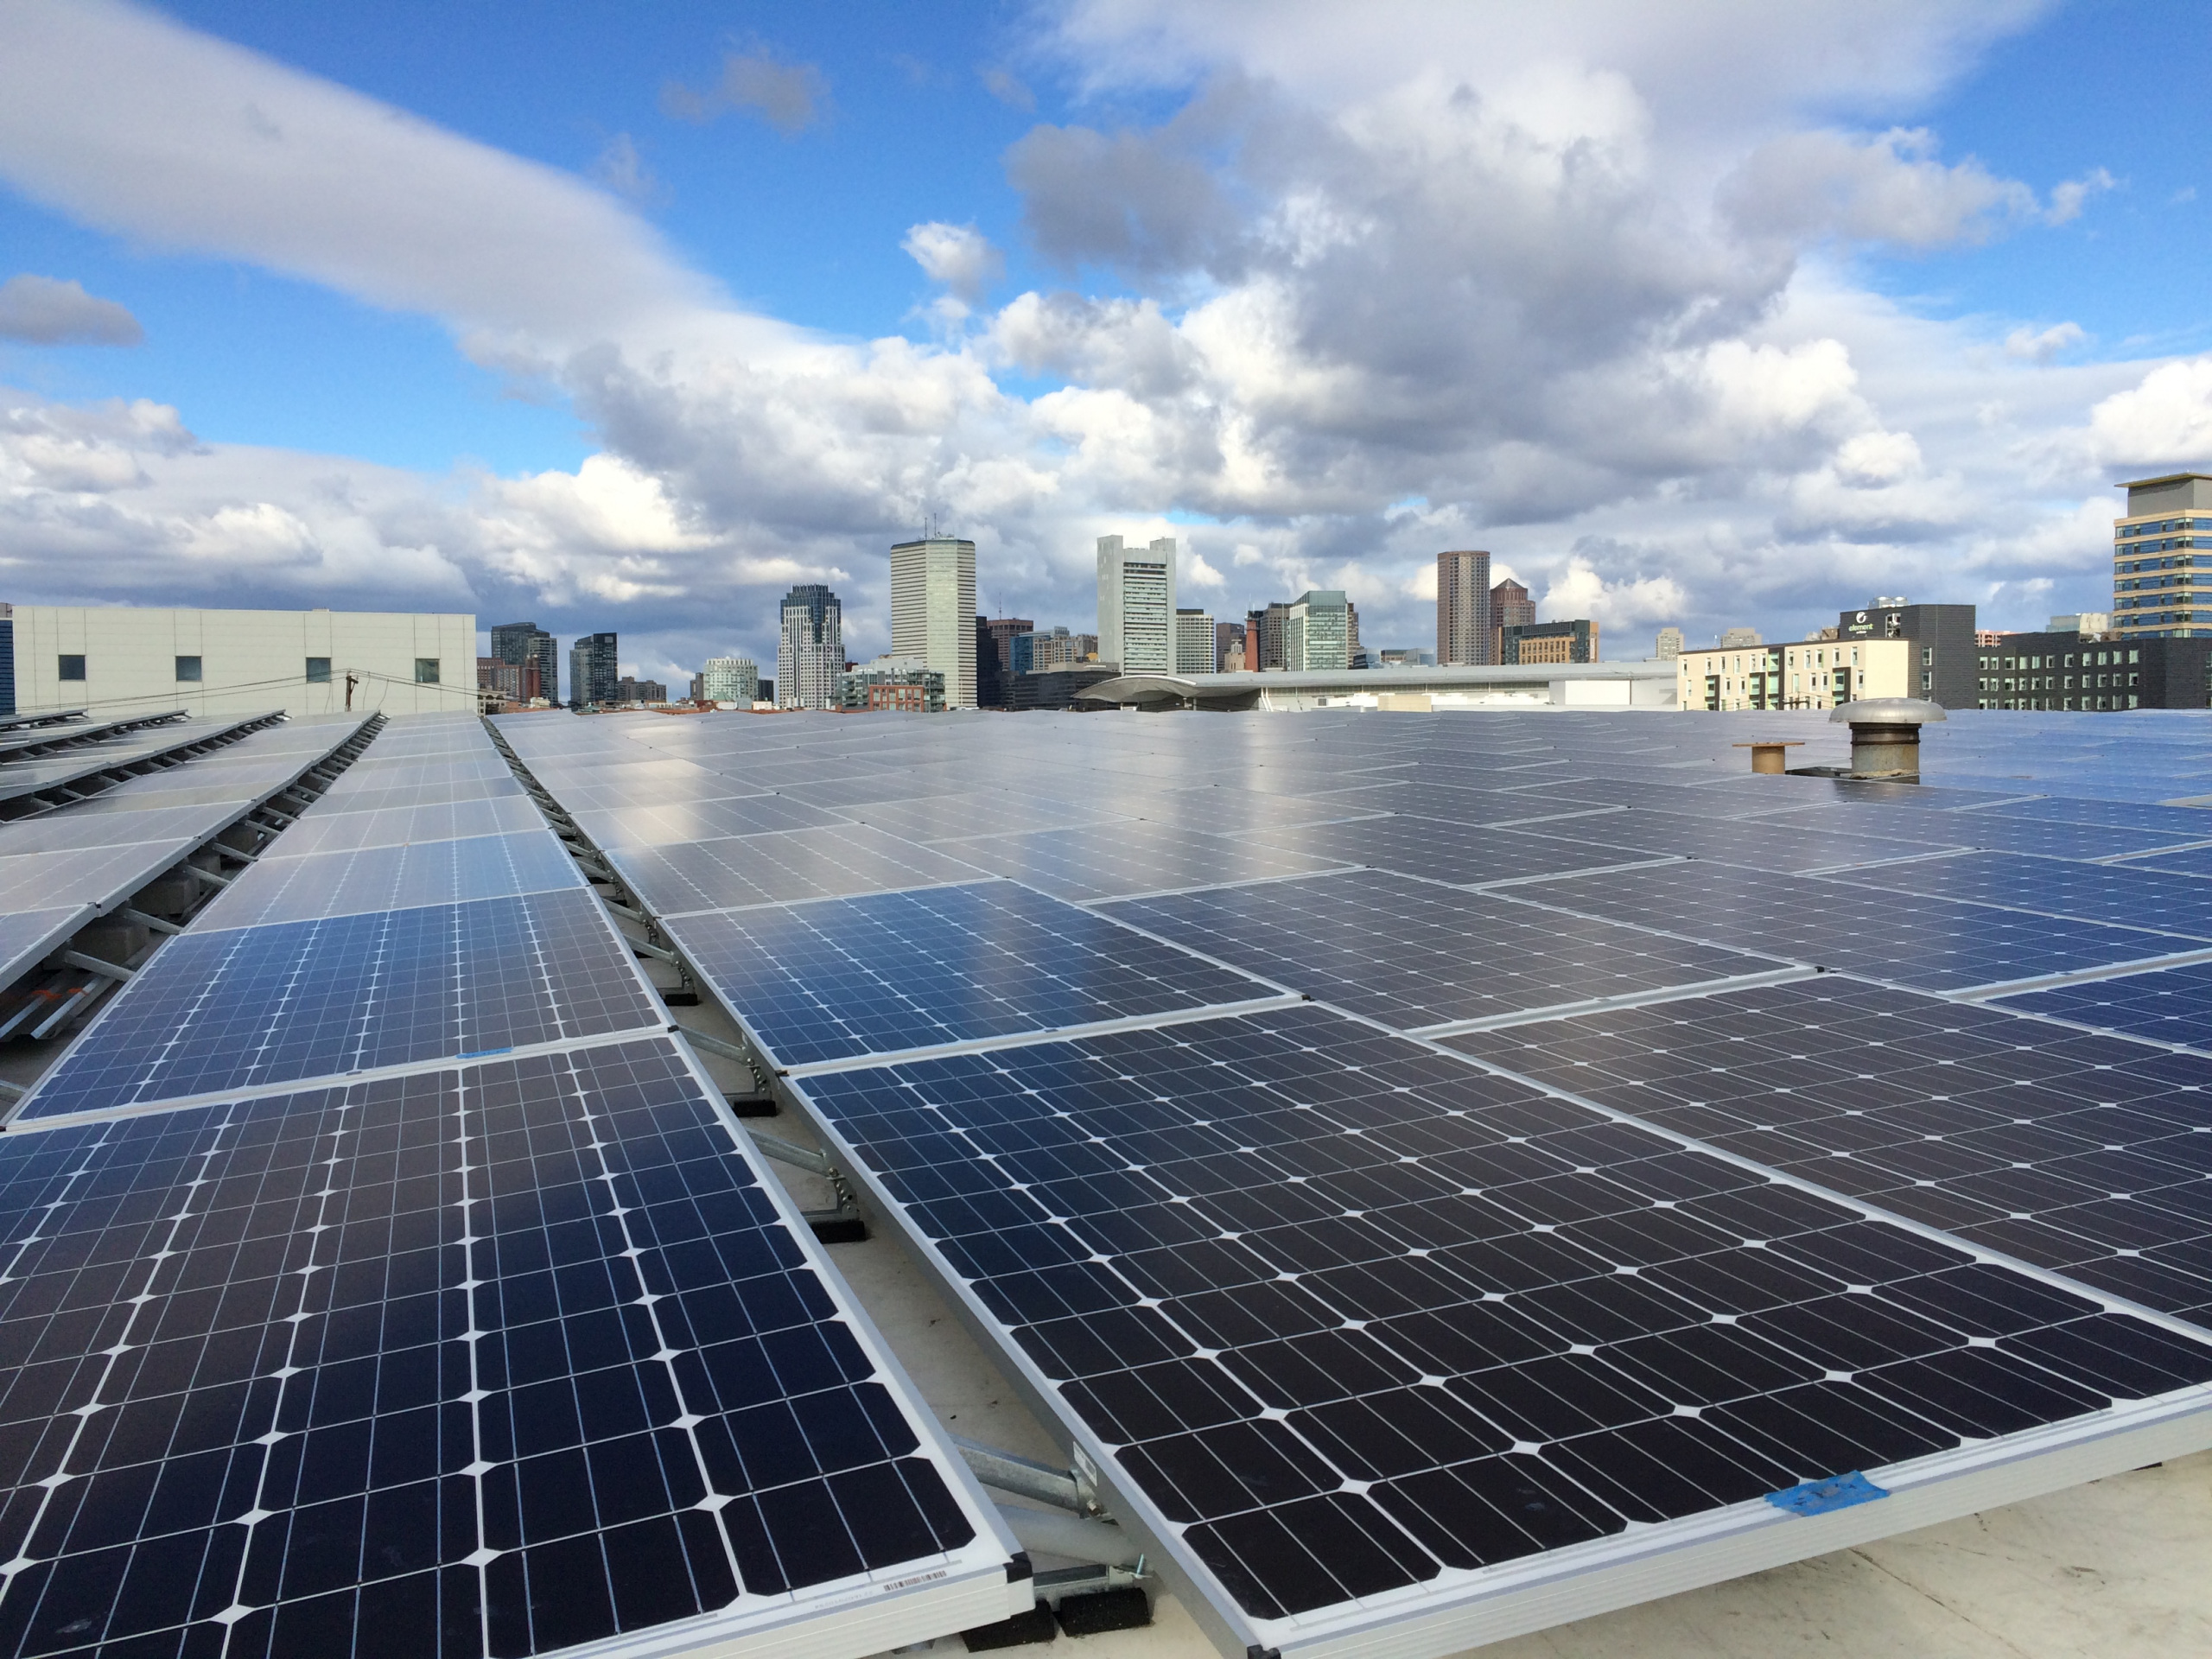 The Boston skyline is visible over the largest solar installation in Boston, located on a warehouse in the Seaport district.